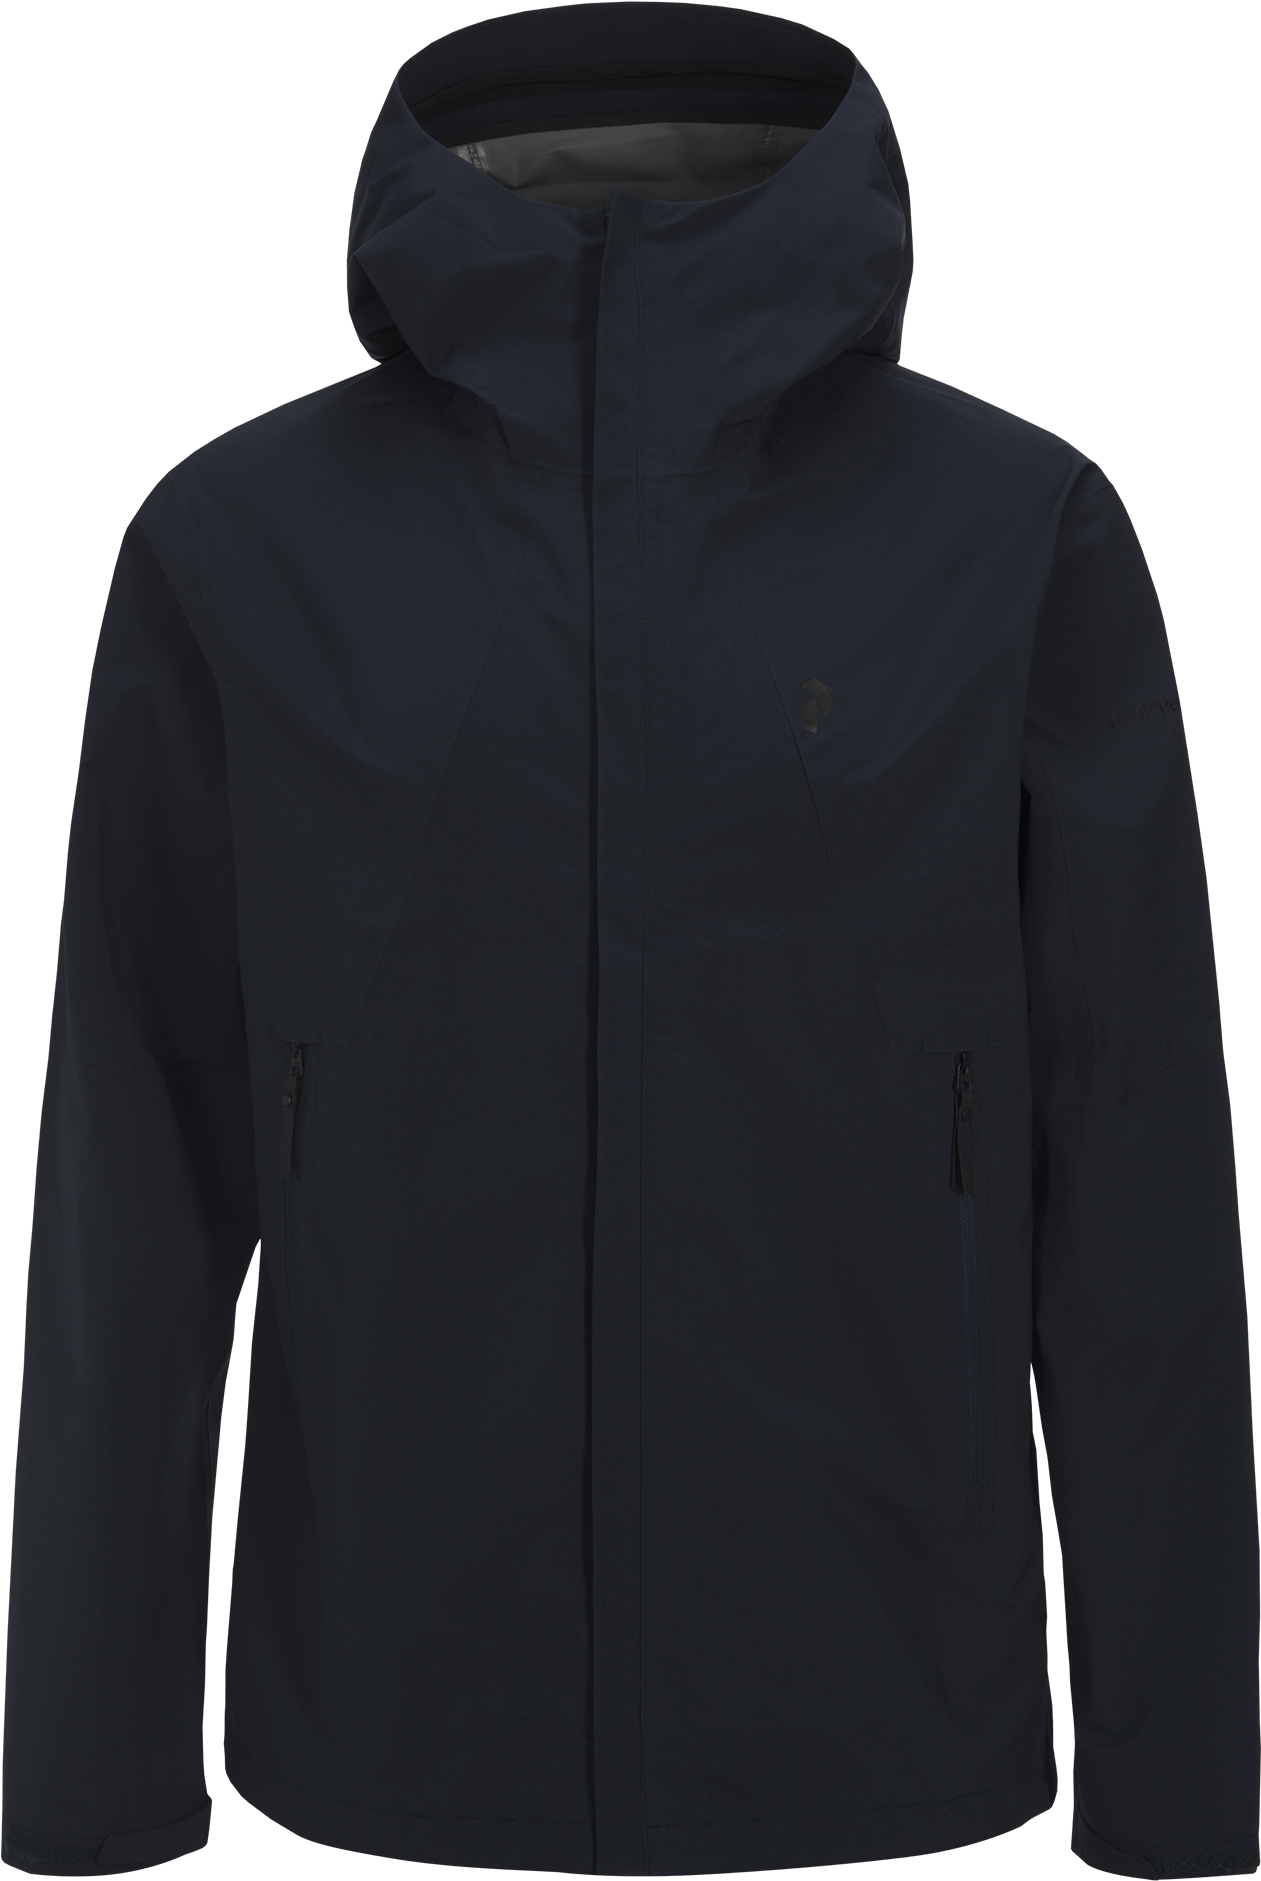 Navy Blue Hooded Jacket PNG